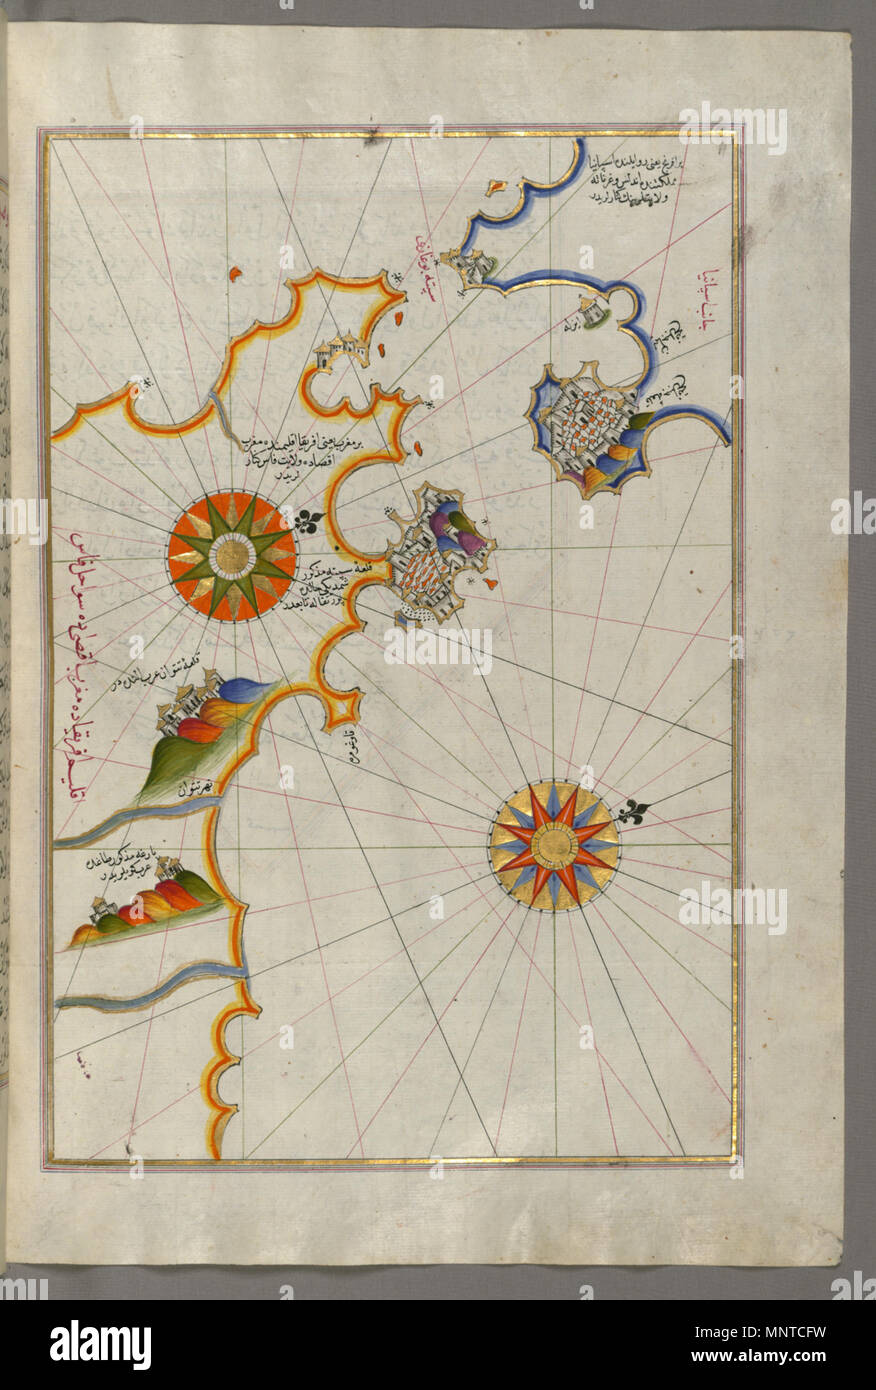 Piri Reis (Turkish, 1465-1555). 'Leaf from Book on Navigation,' 17th-18th century. ink, paint, and gold on paper. Walters Art Museum (W.658.264B): Acquired by Henry Walters. W.658.264b 1003 Piri Reis - Map of Southern Spain and Morocco with the Cities of Gibraltar, Ceuta and Tetouan - Walters W658264B - Full Page Stock Photo